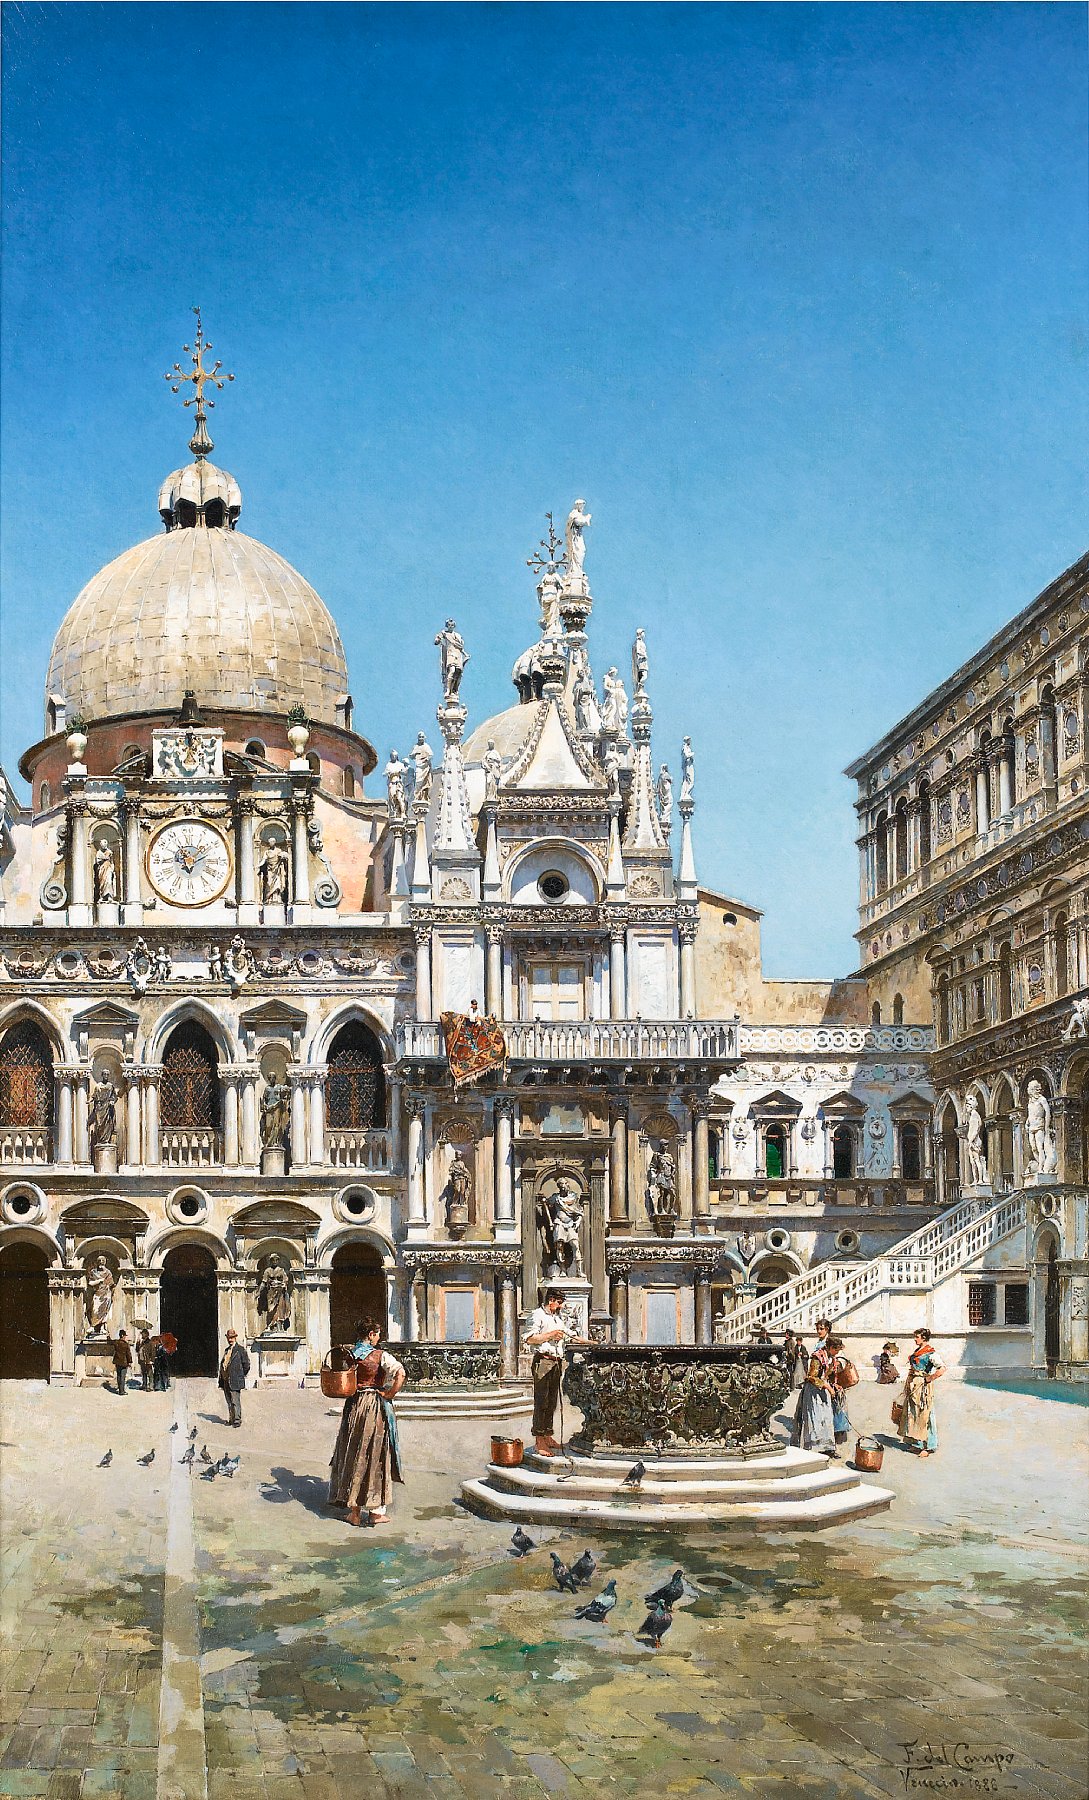 Federico del Campo – Courtyard of the Doge’s Palace Venice (1888)